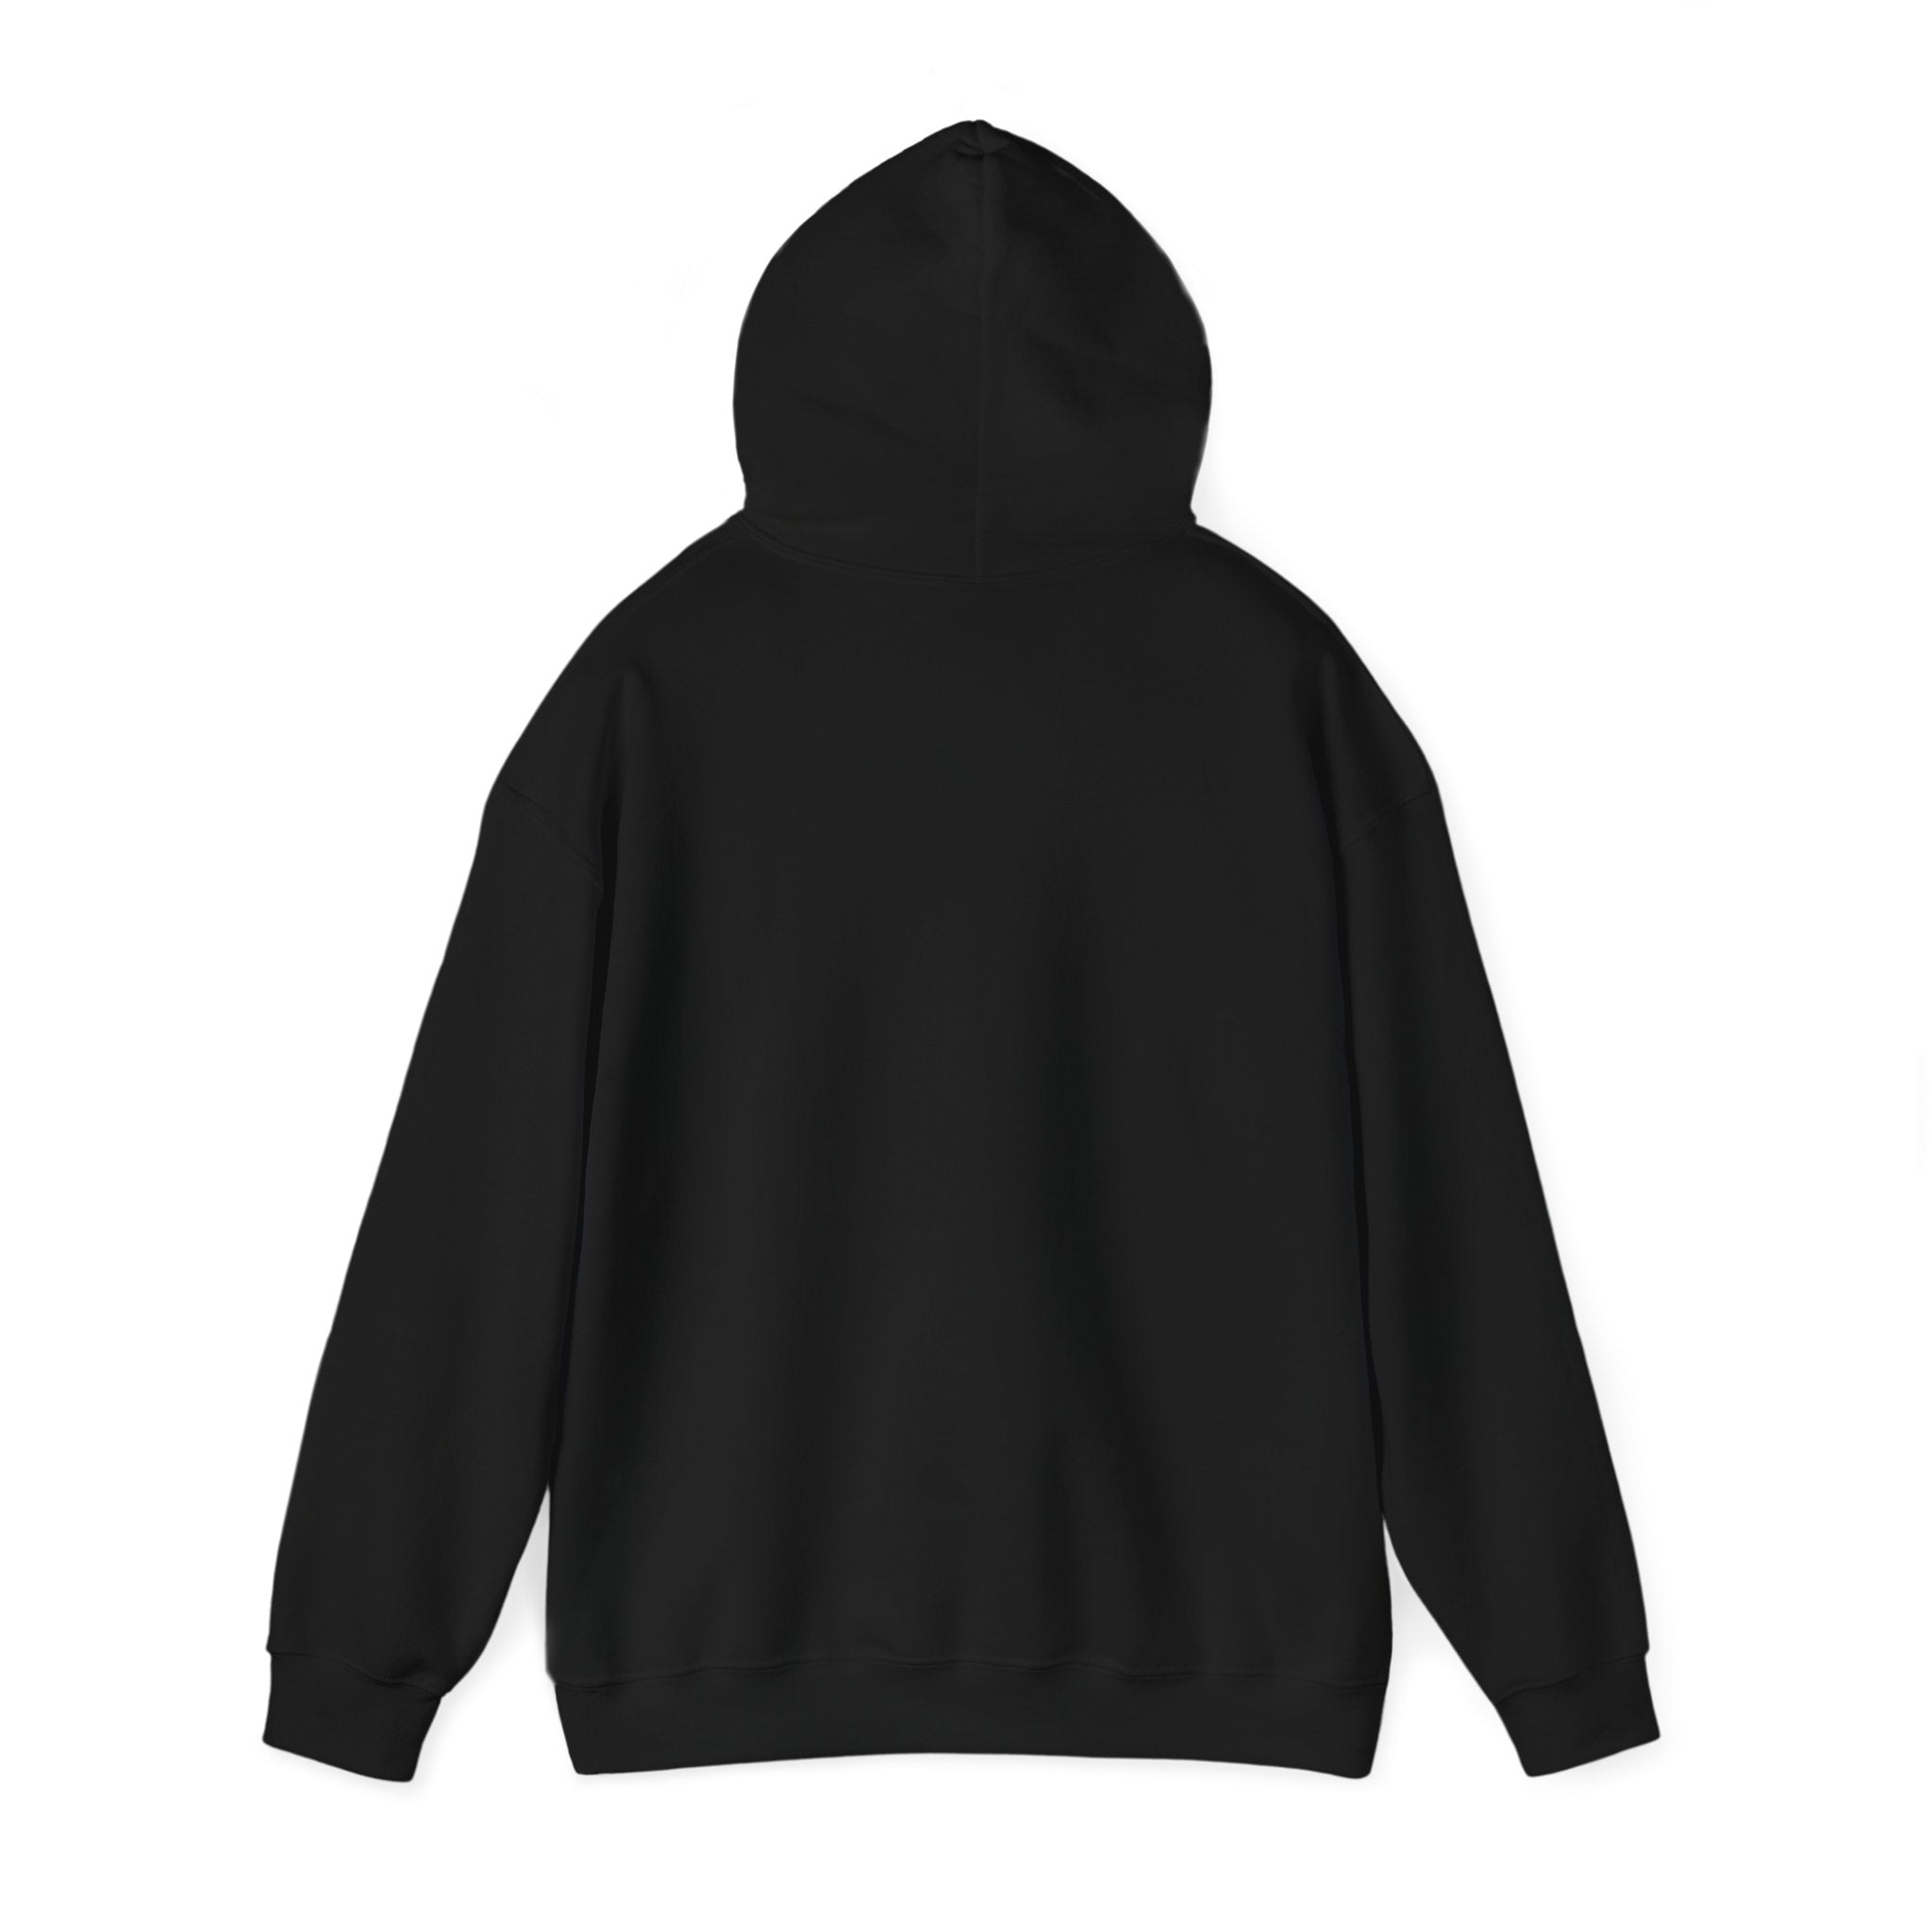 Do not under any circumstances give me a cigarette Hoodie - Unisex Heavy Blend™